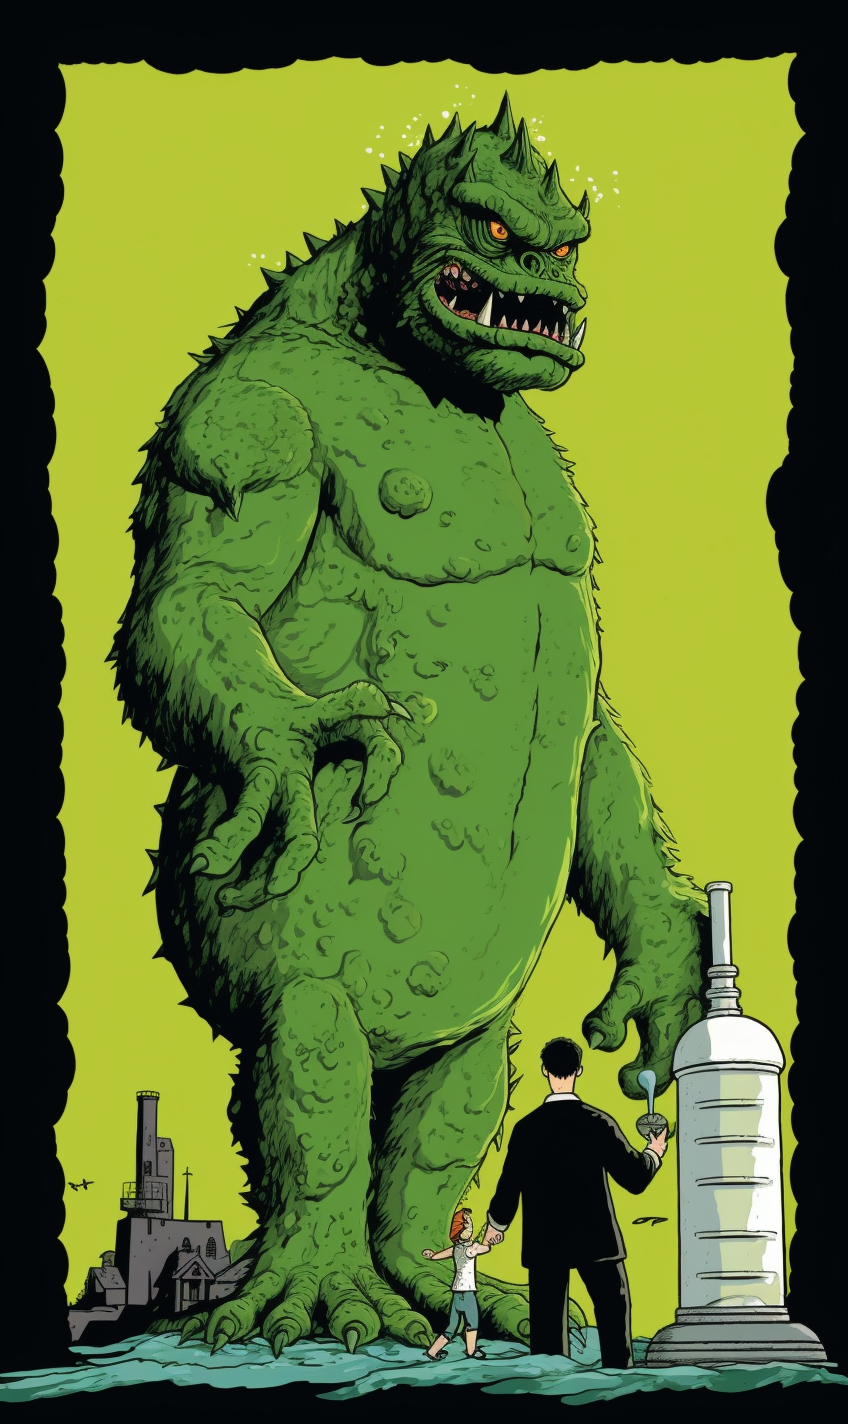 ThE_ED_a_huge_green_monster_towering_over_a_small_scientist_3b43fbd0-6b2a-4170-bf81-1d3289daa28e.png